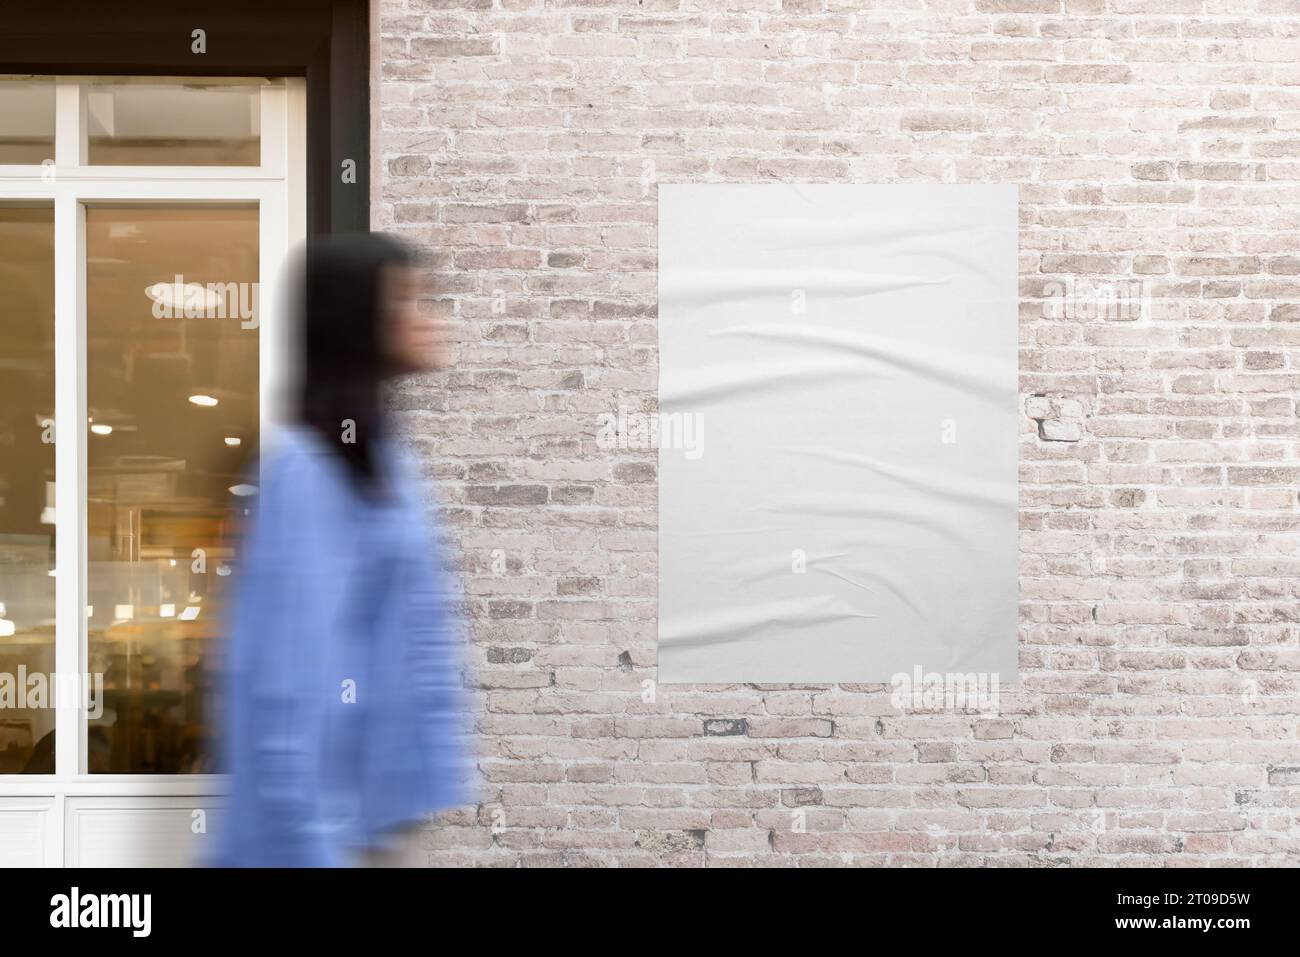 Poster adhered to a brick wall next to a shop door. Woman in motion walking beside. The urban scene with dynamic movement for poster mockup and design Stock Photo